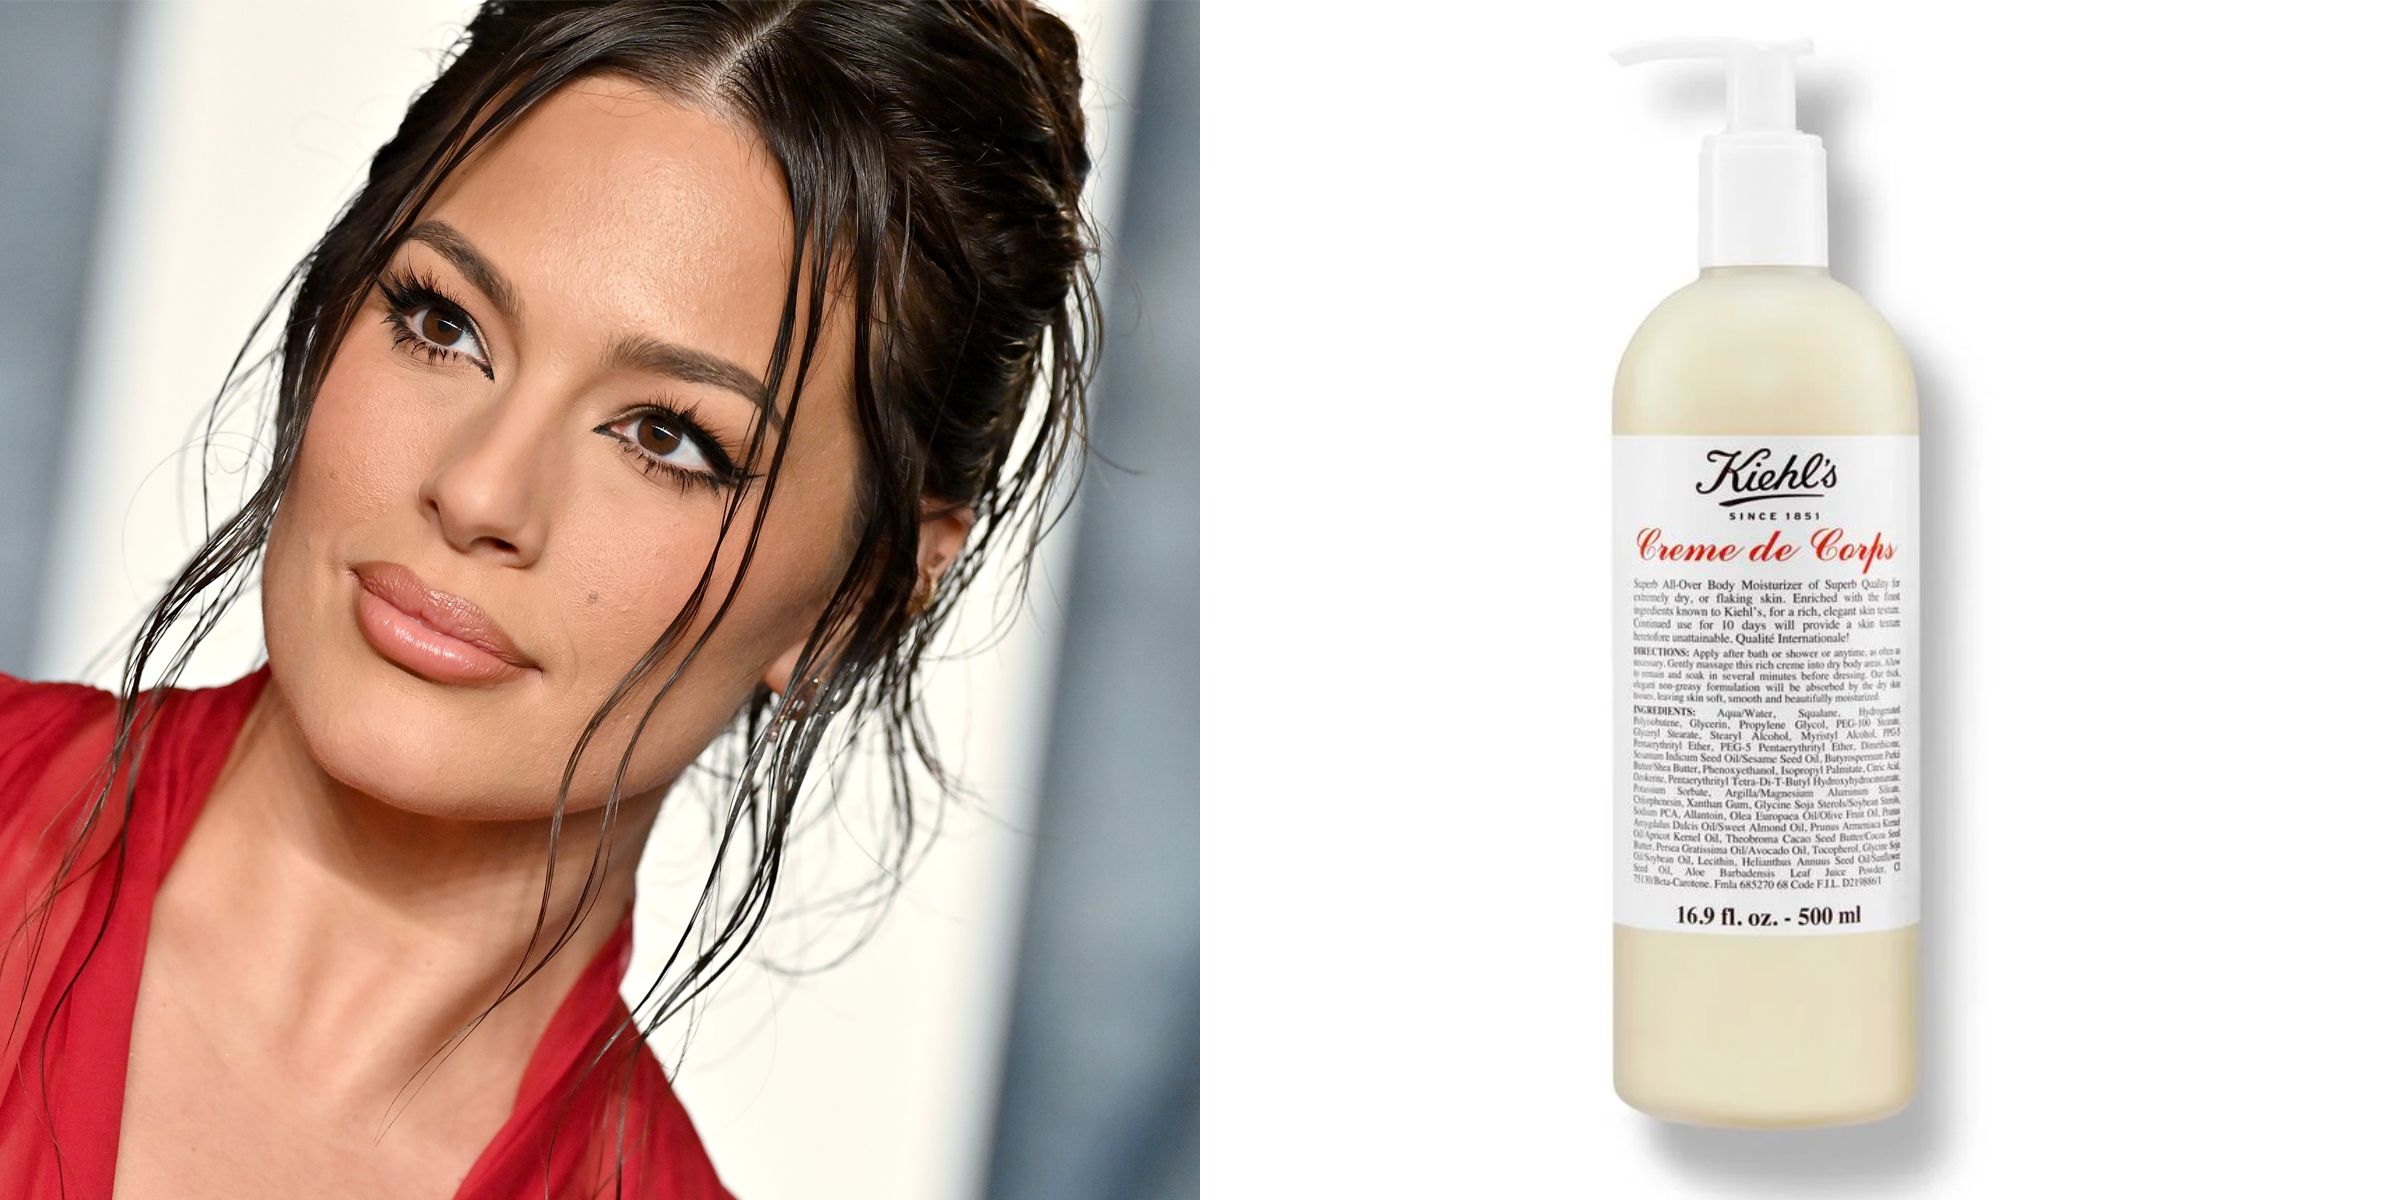 The Best Body Care Routine For Soft Skin - Kiehl's